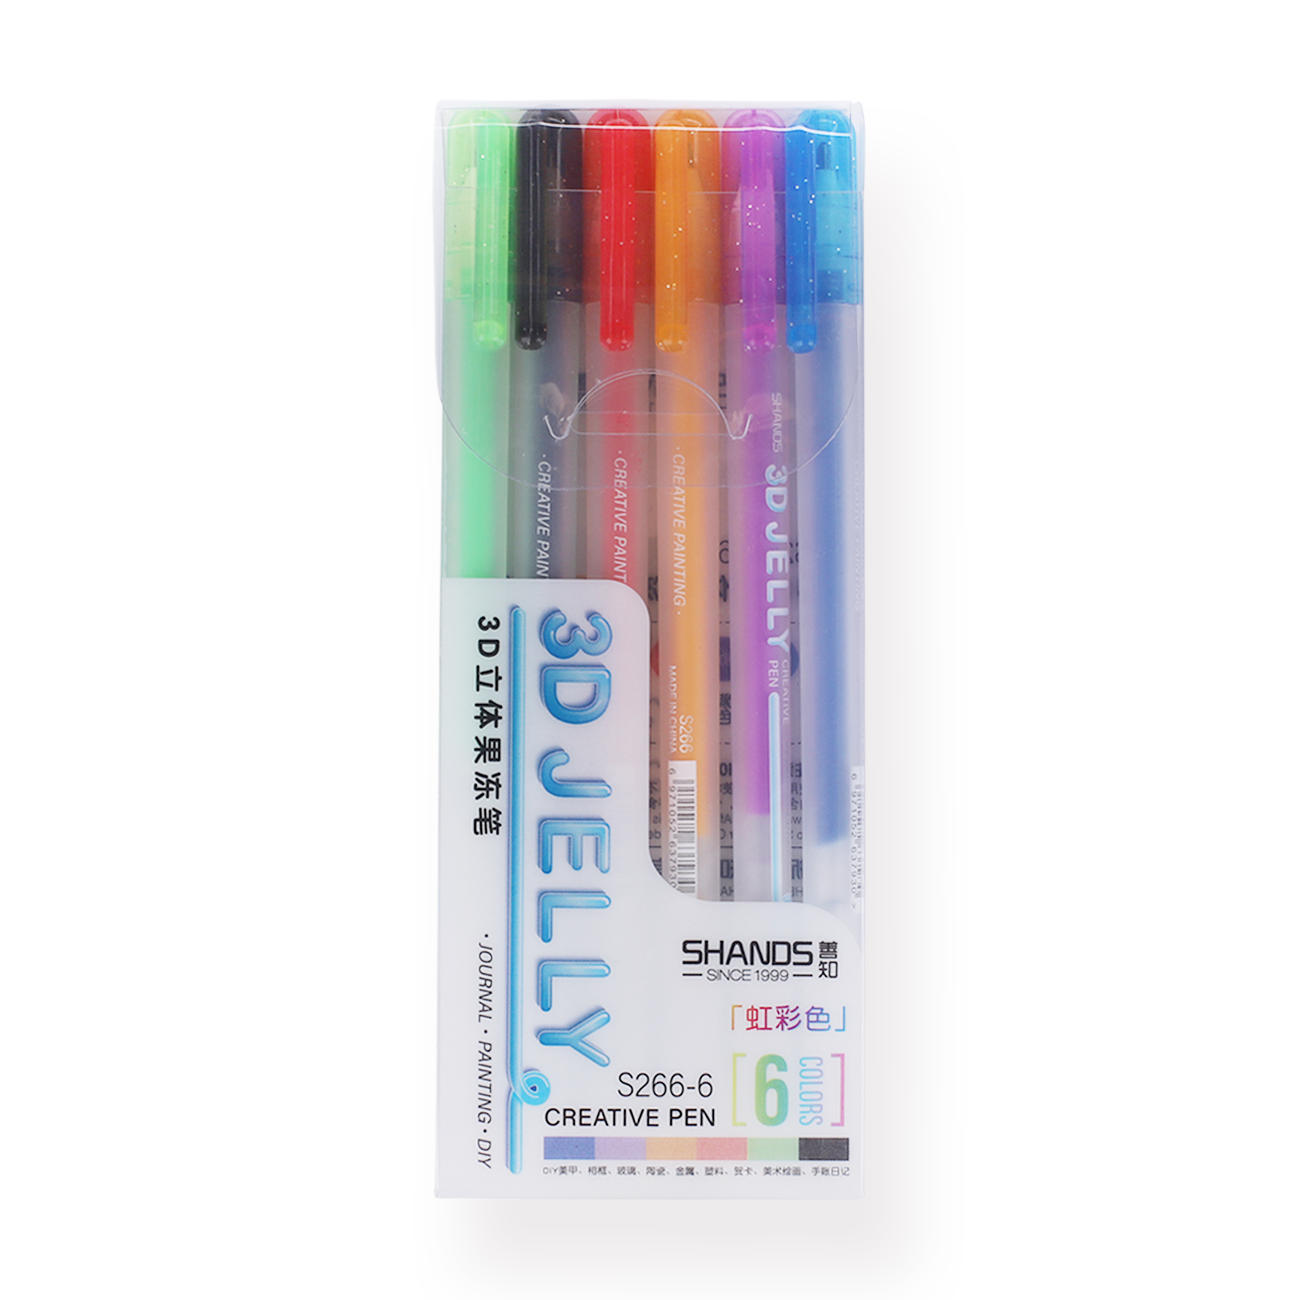 3D Jelly Pen Swatches🔍3D Jelly Pen#stationerypal #stationery #fyp #3d